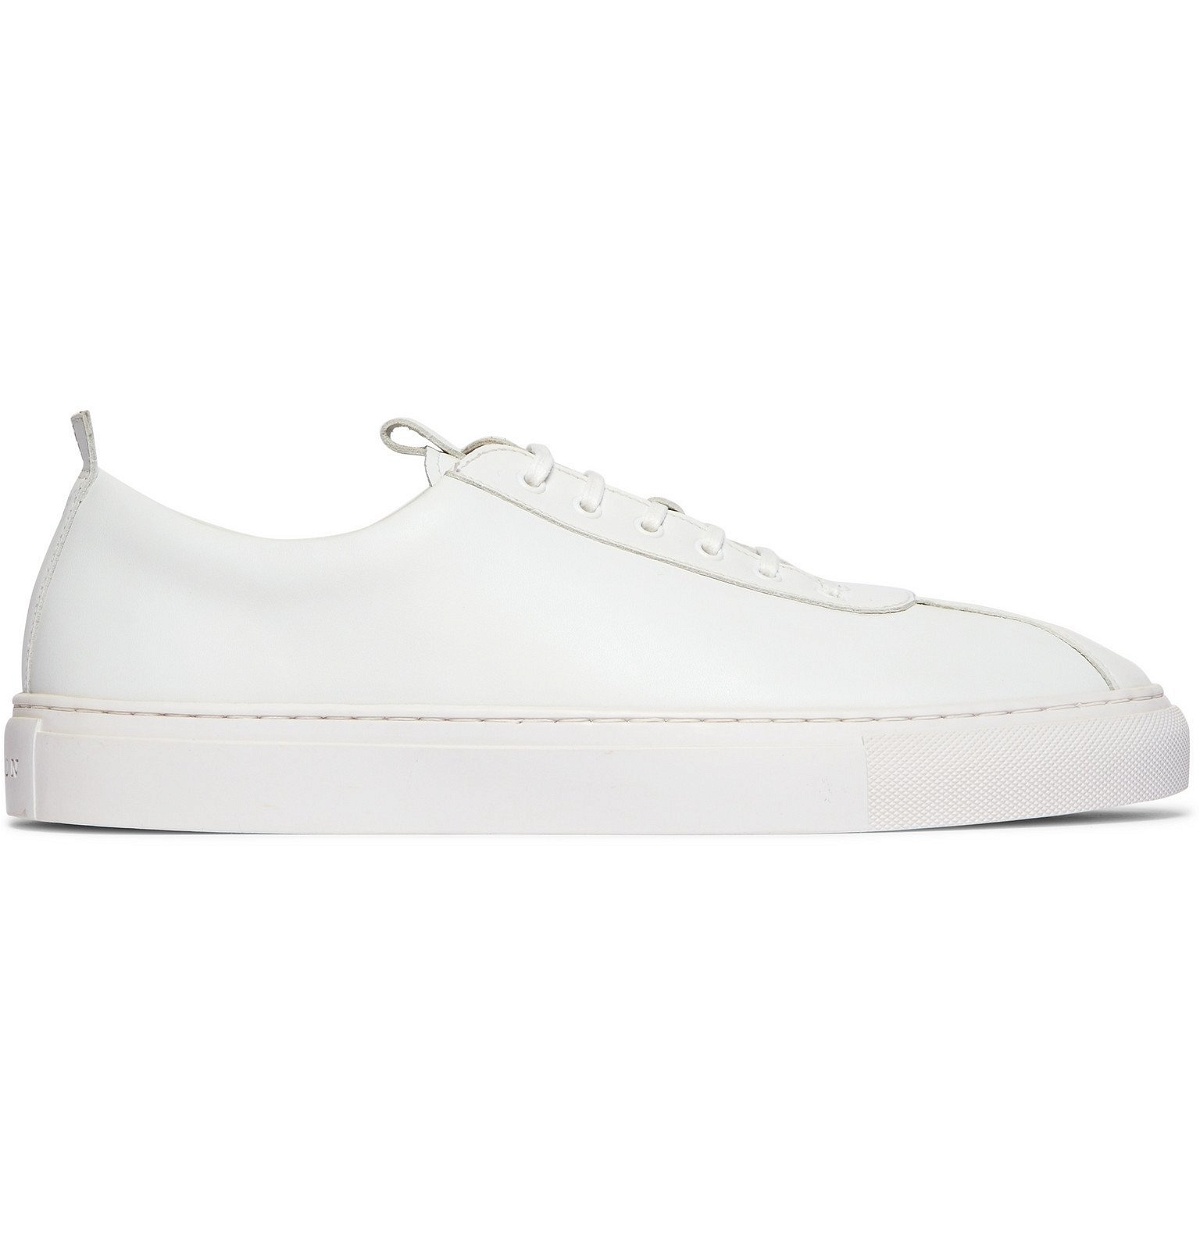 Grenson - Faux Leather Sneakers - White Grenson